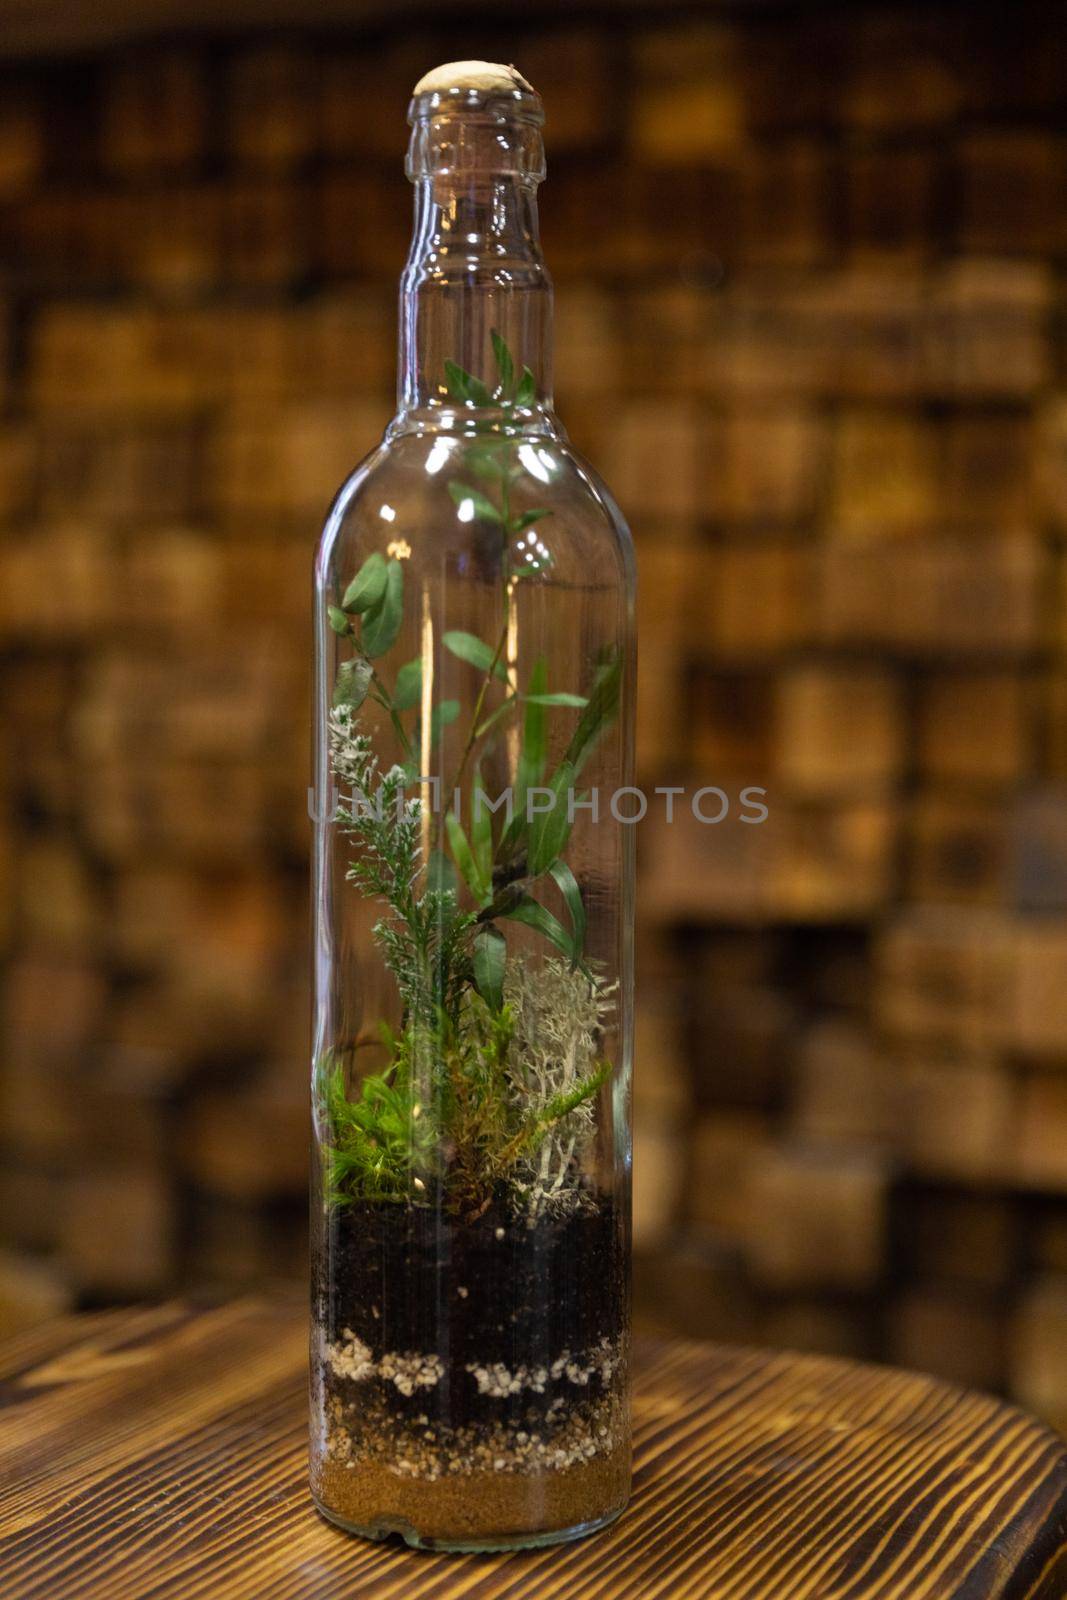 flowers and moss that grow inside the bottle by TRMK